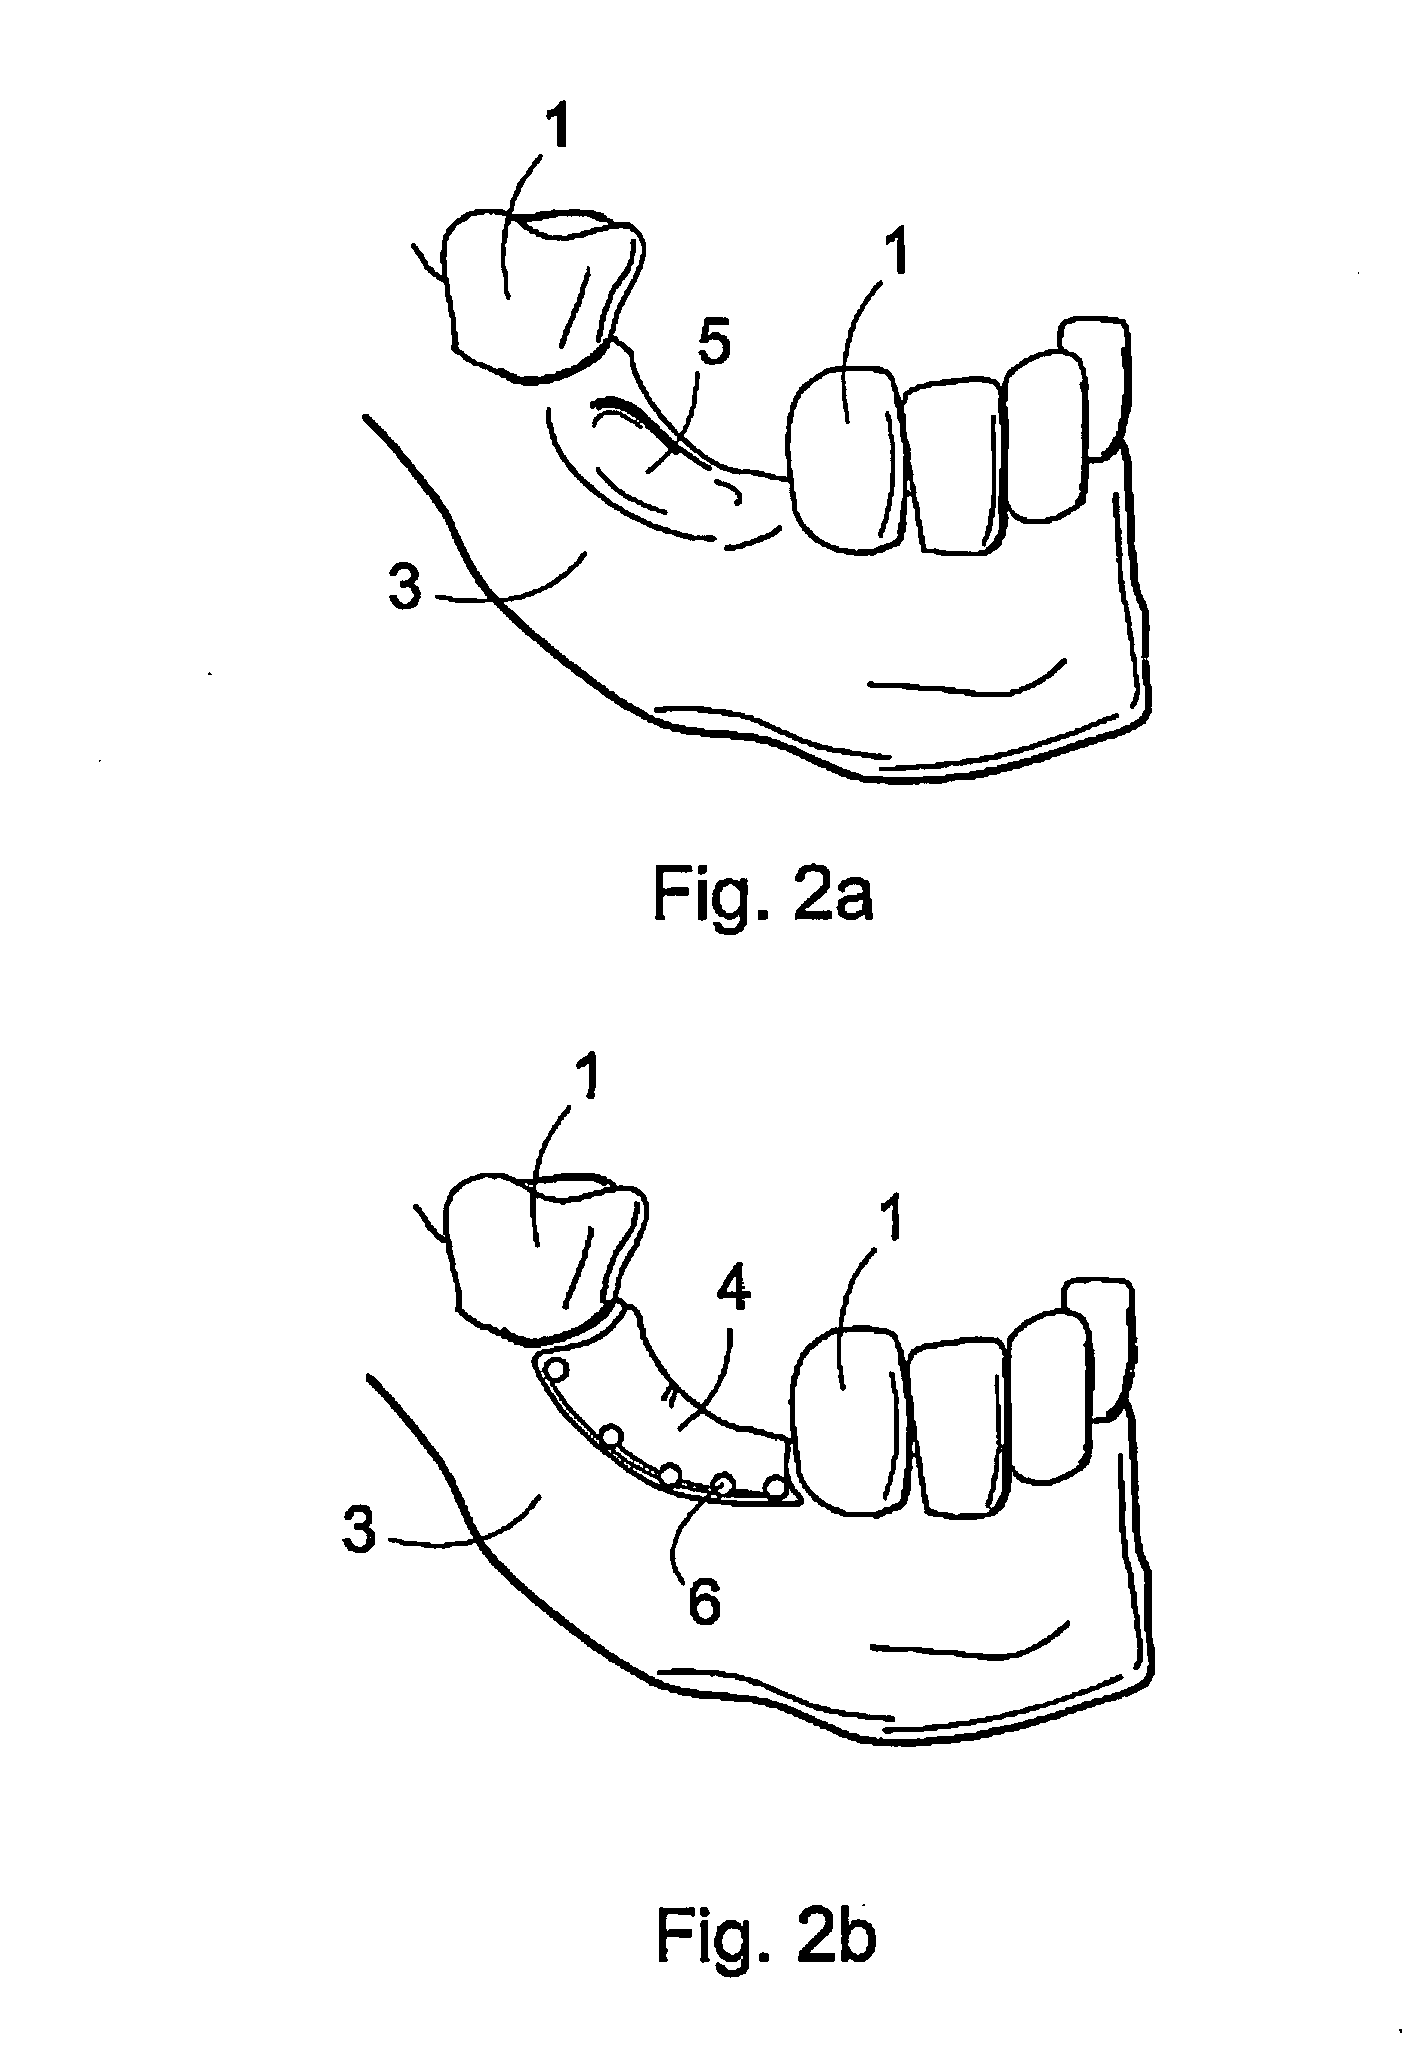 Biodegradable implant and method for manufacturing one